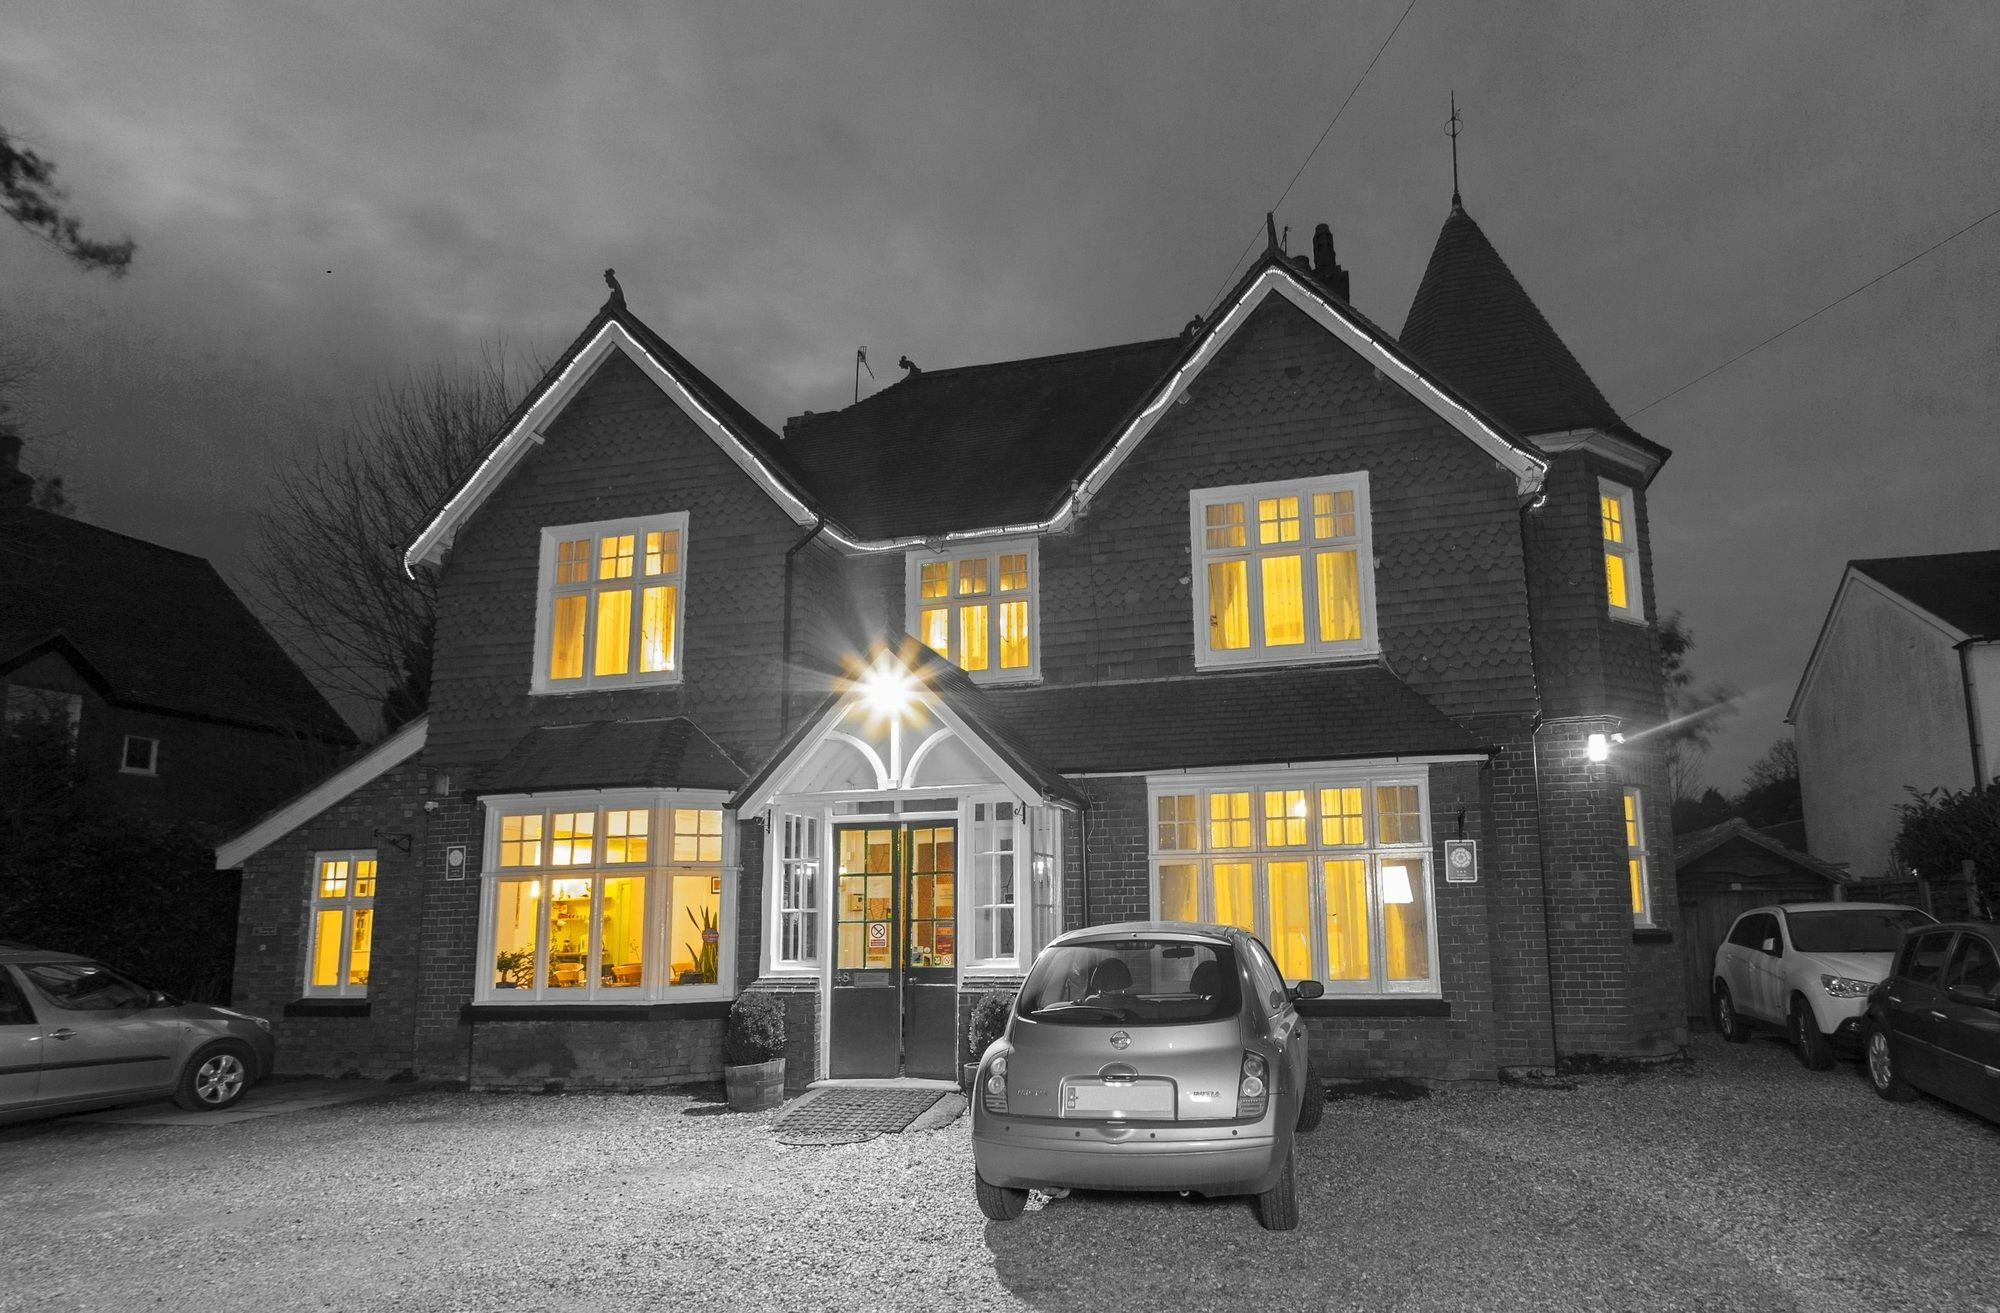 Gatwick Turret Guest House Horley Exterior photo